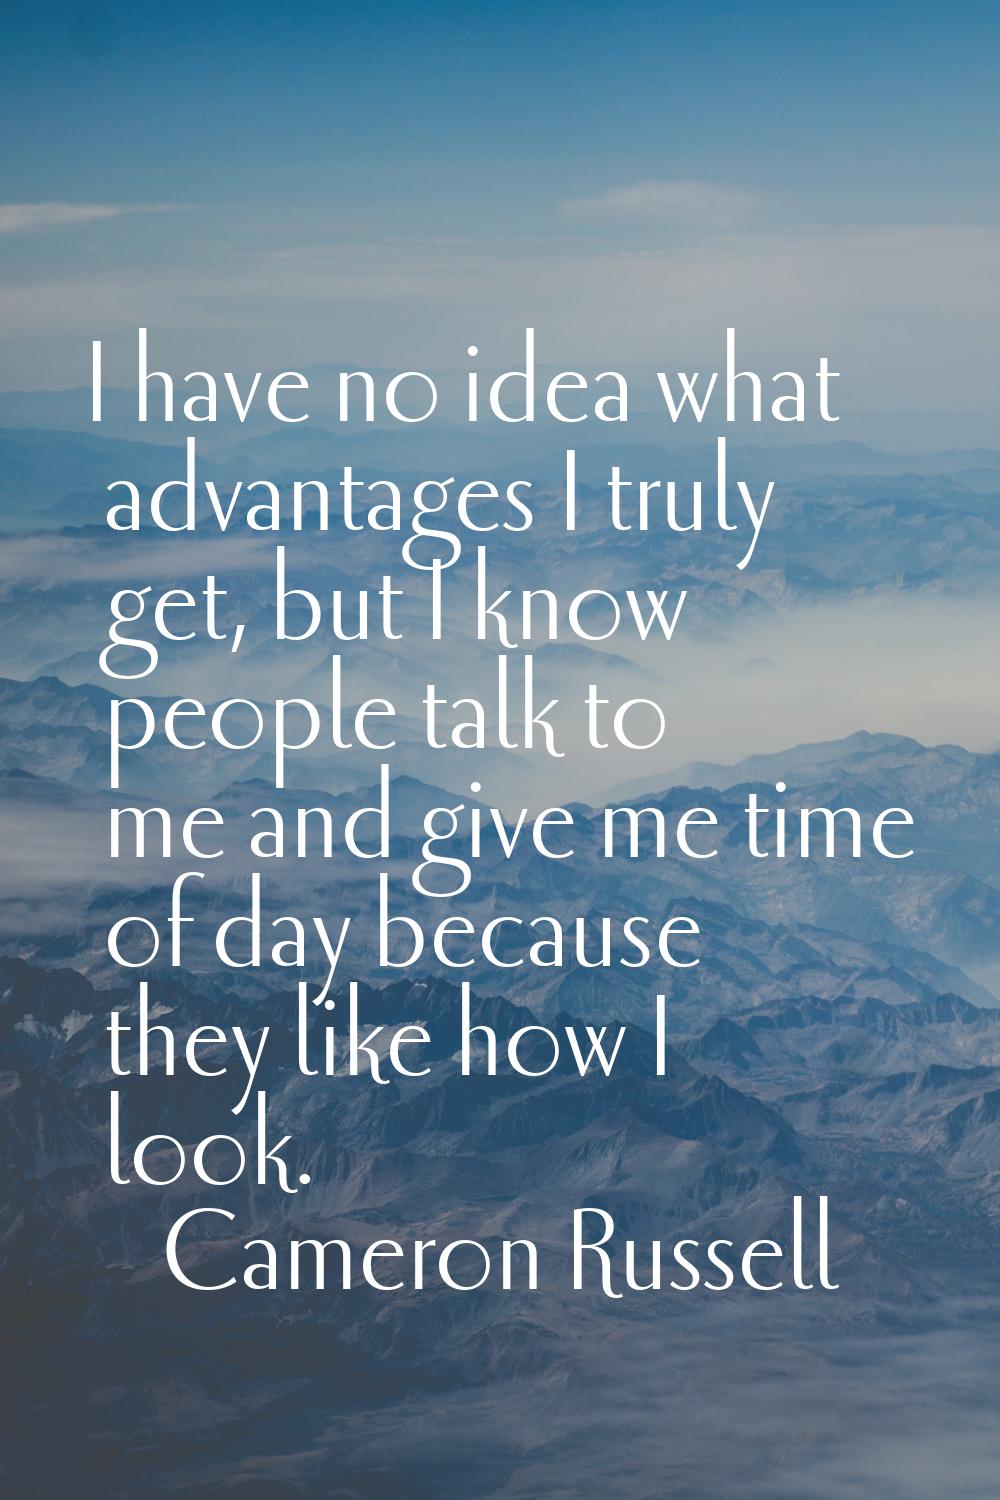 I have no idea what advantages I truly get, but I know people talk to me and give me time of day be